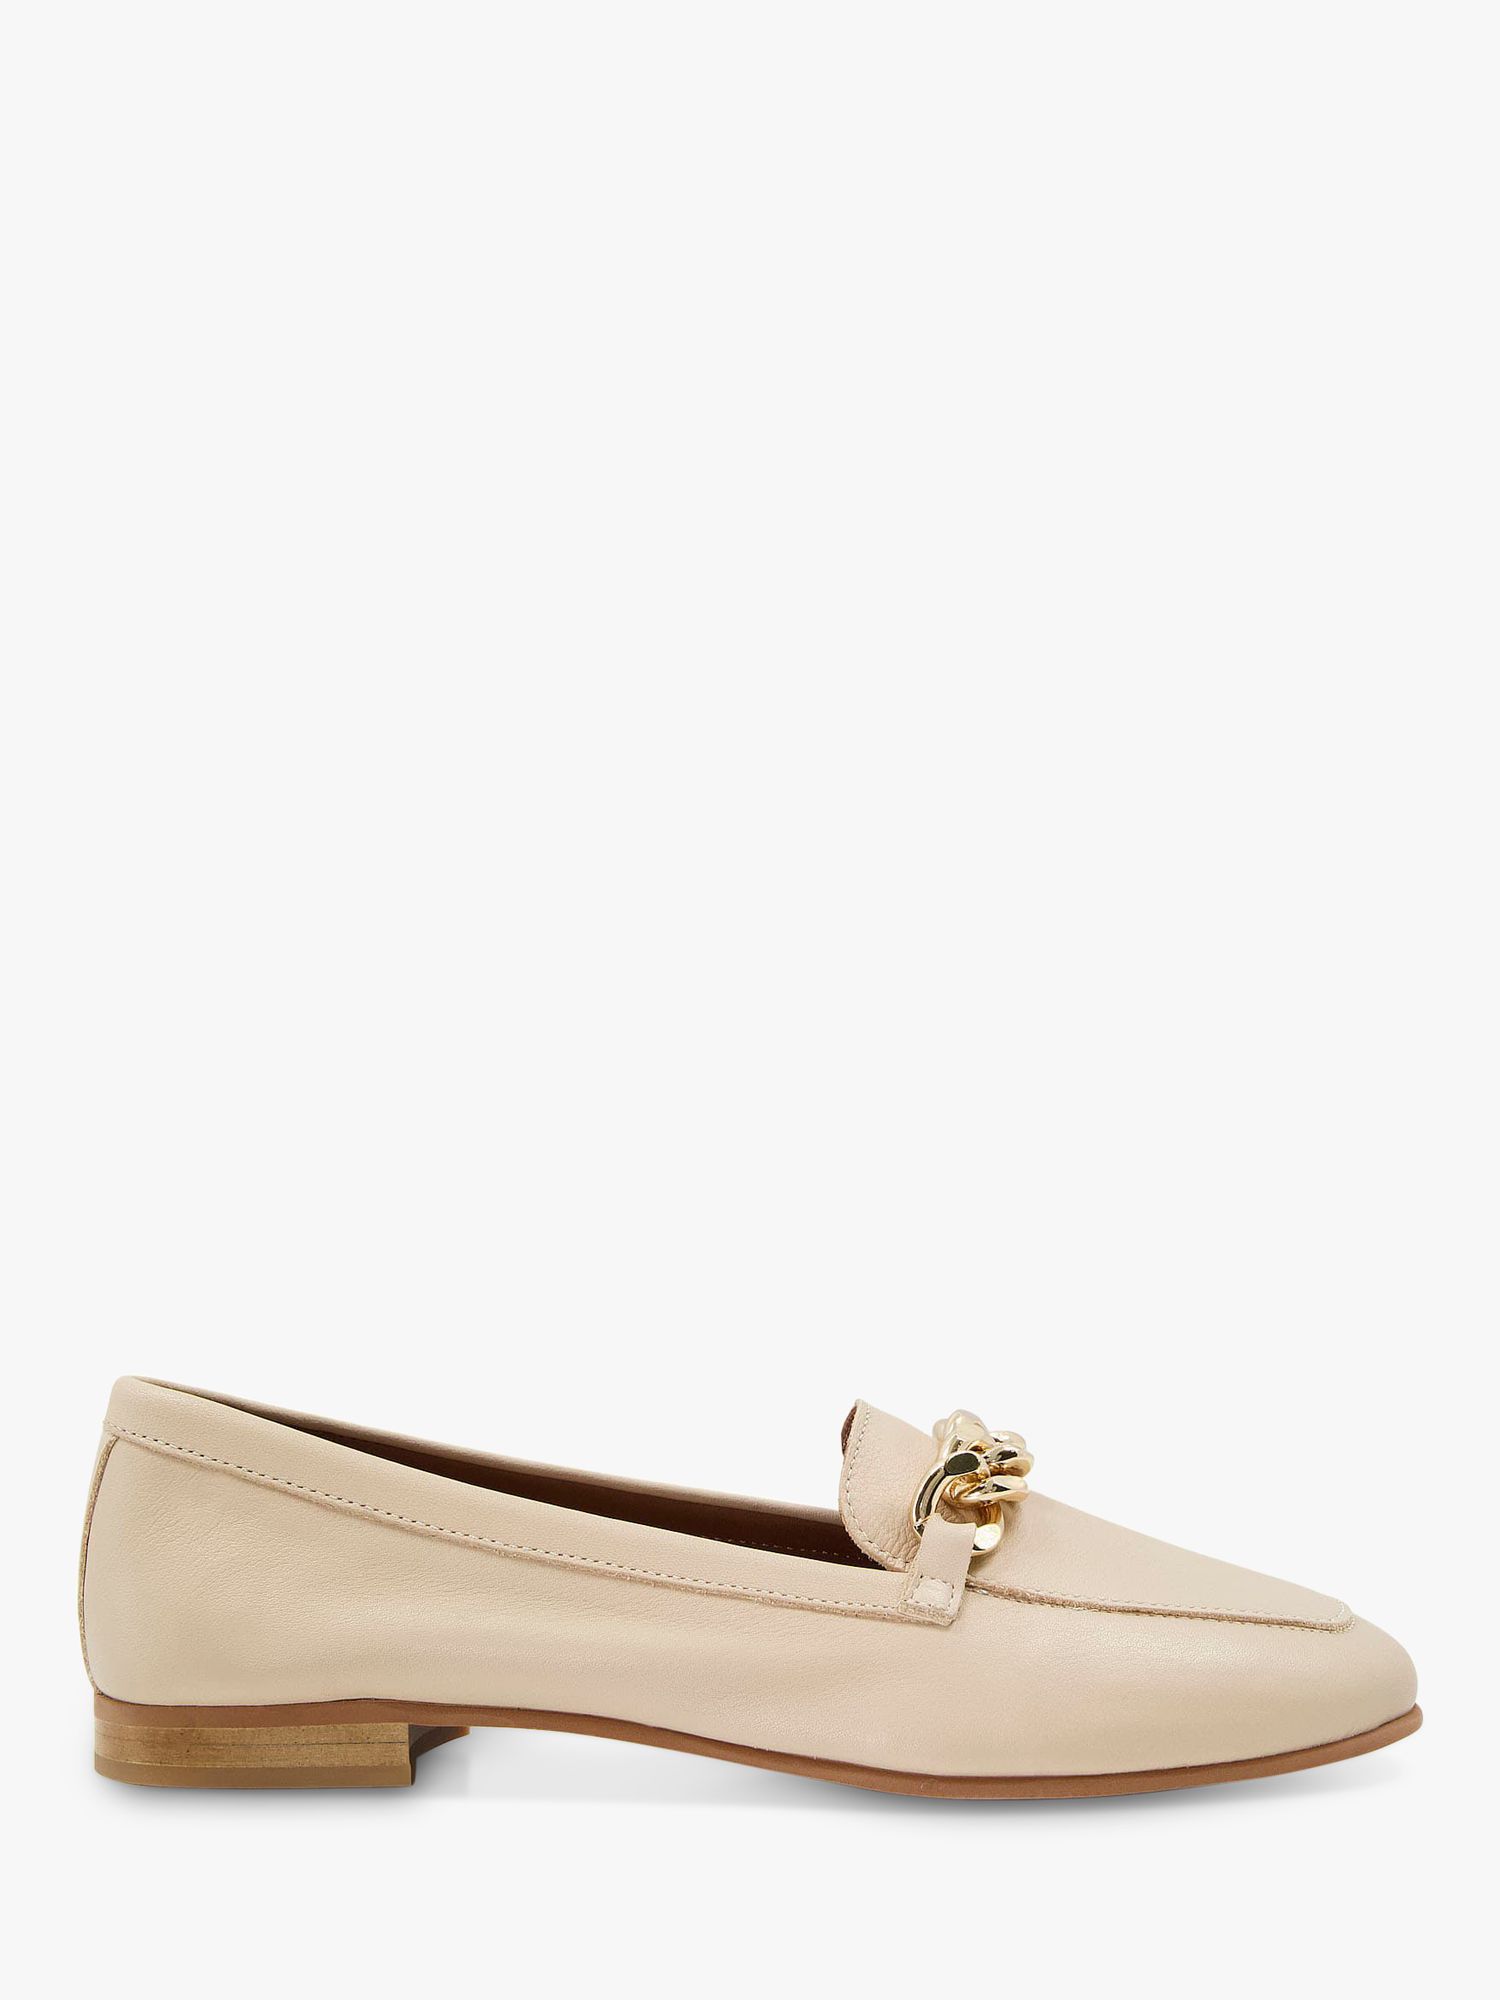 Dune Goldsmith Leather Chain Detail Loafers, Ecru, 3